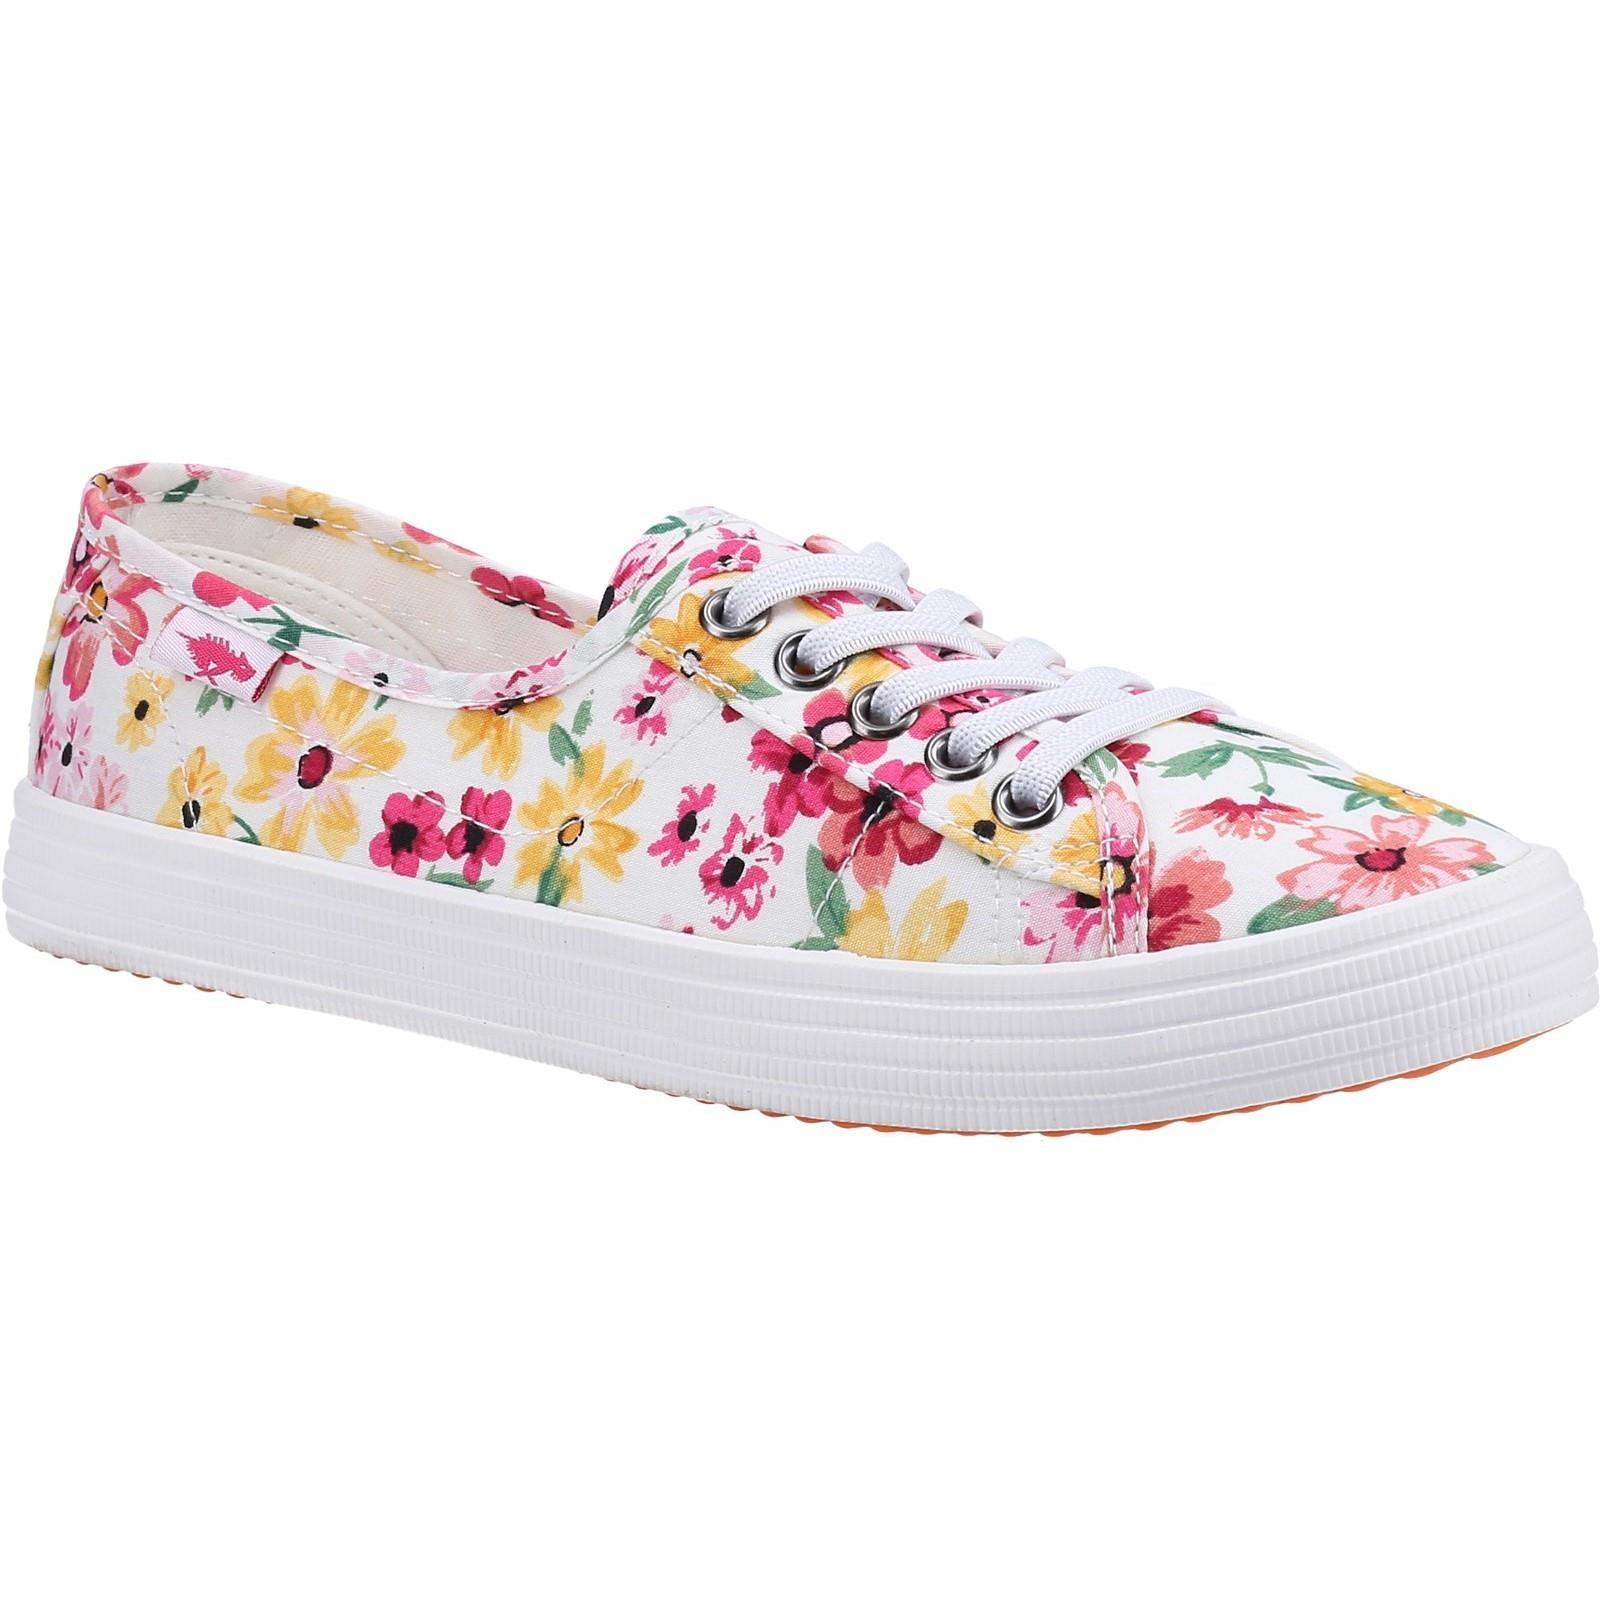 Rocket Dog Chow Chow Margate Floral ladies lace up plimsoll trainers shoes